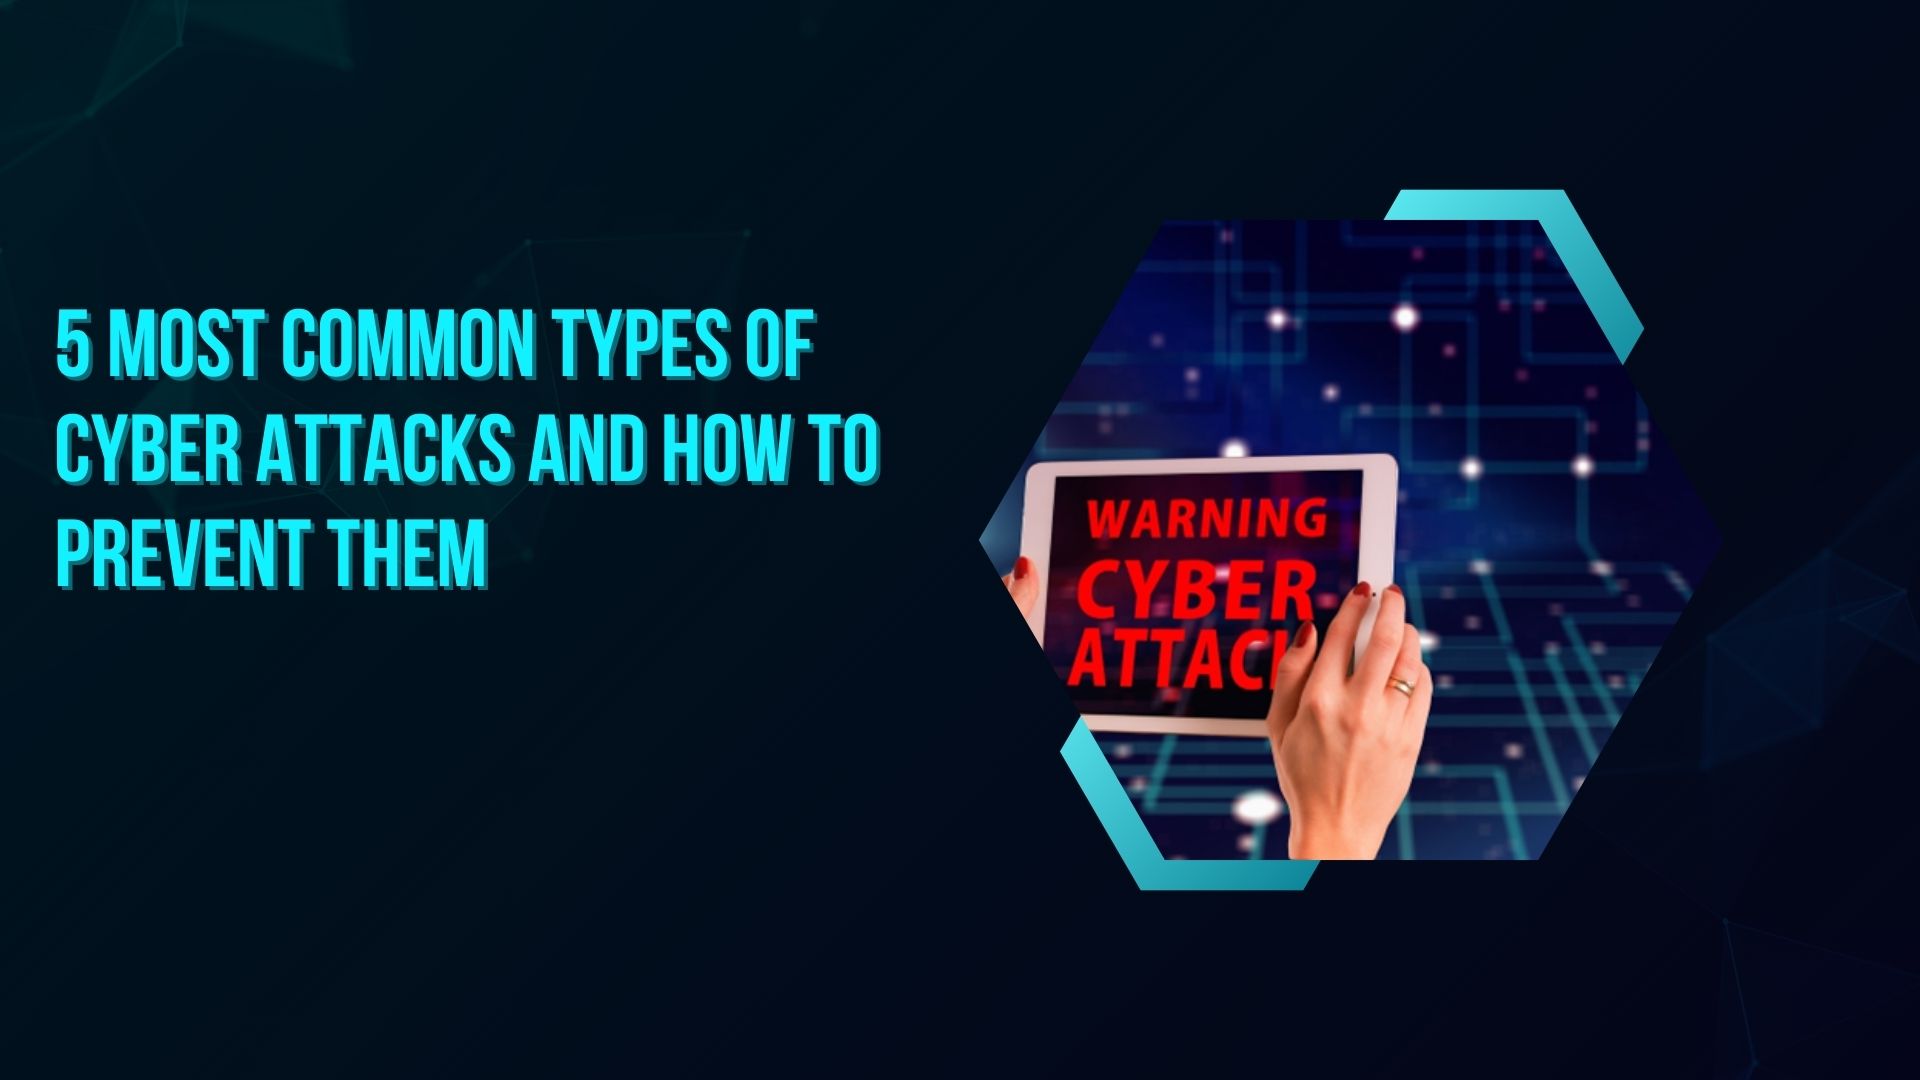 5 Most Common Types of Cyber Attacks and How to Prevent Them